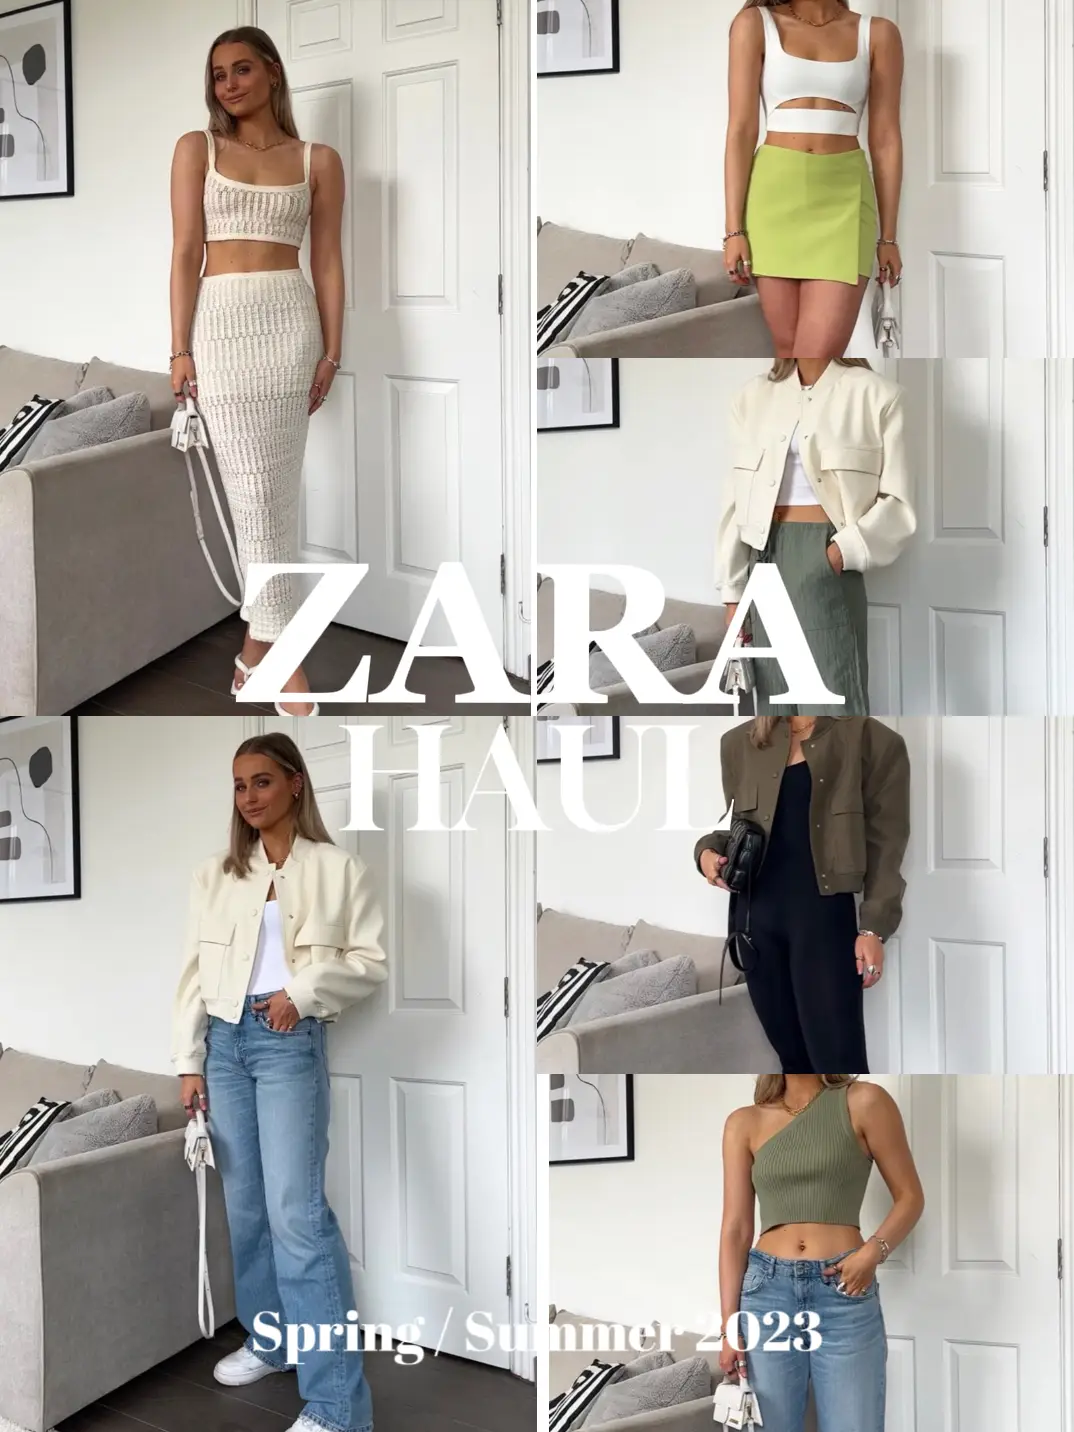 SHEIN summer clothing haul: Zara dupes, CUTE dresses, co-ords + More